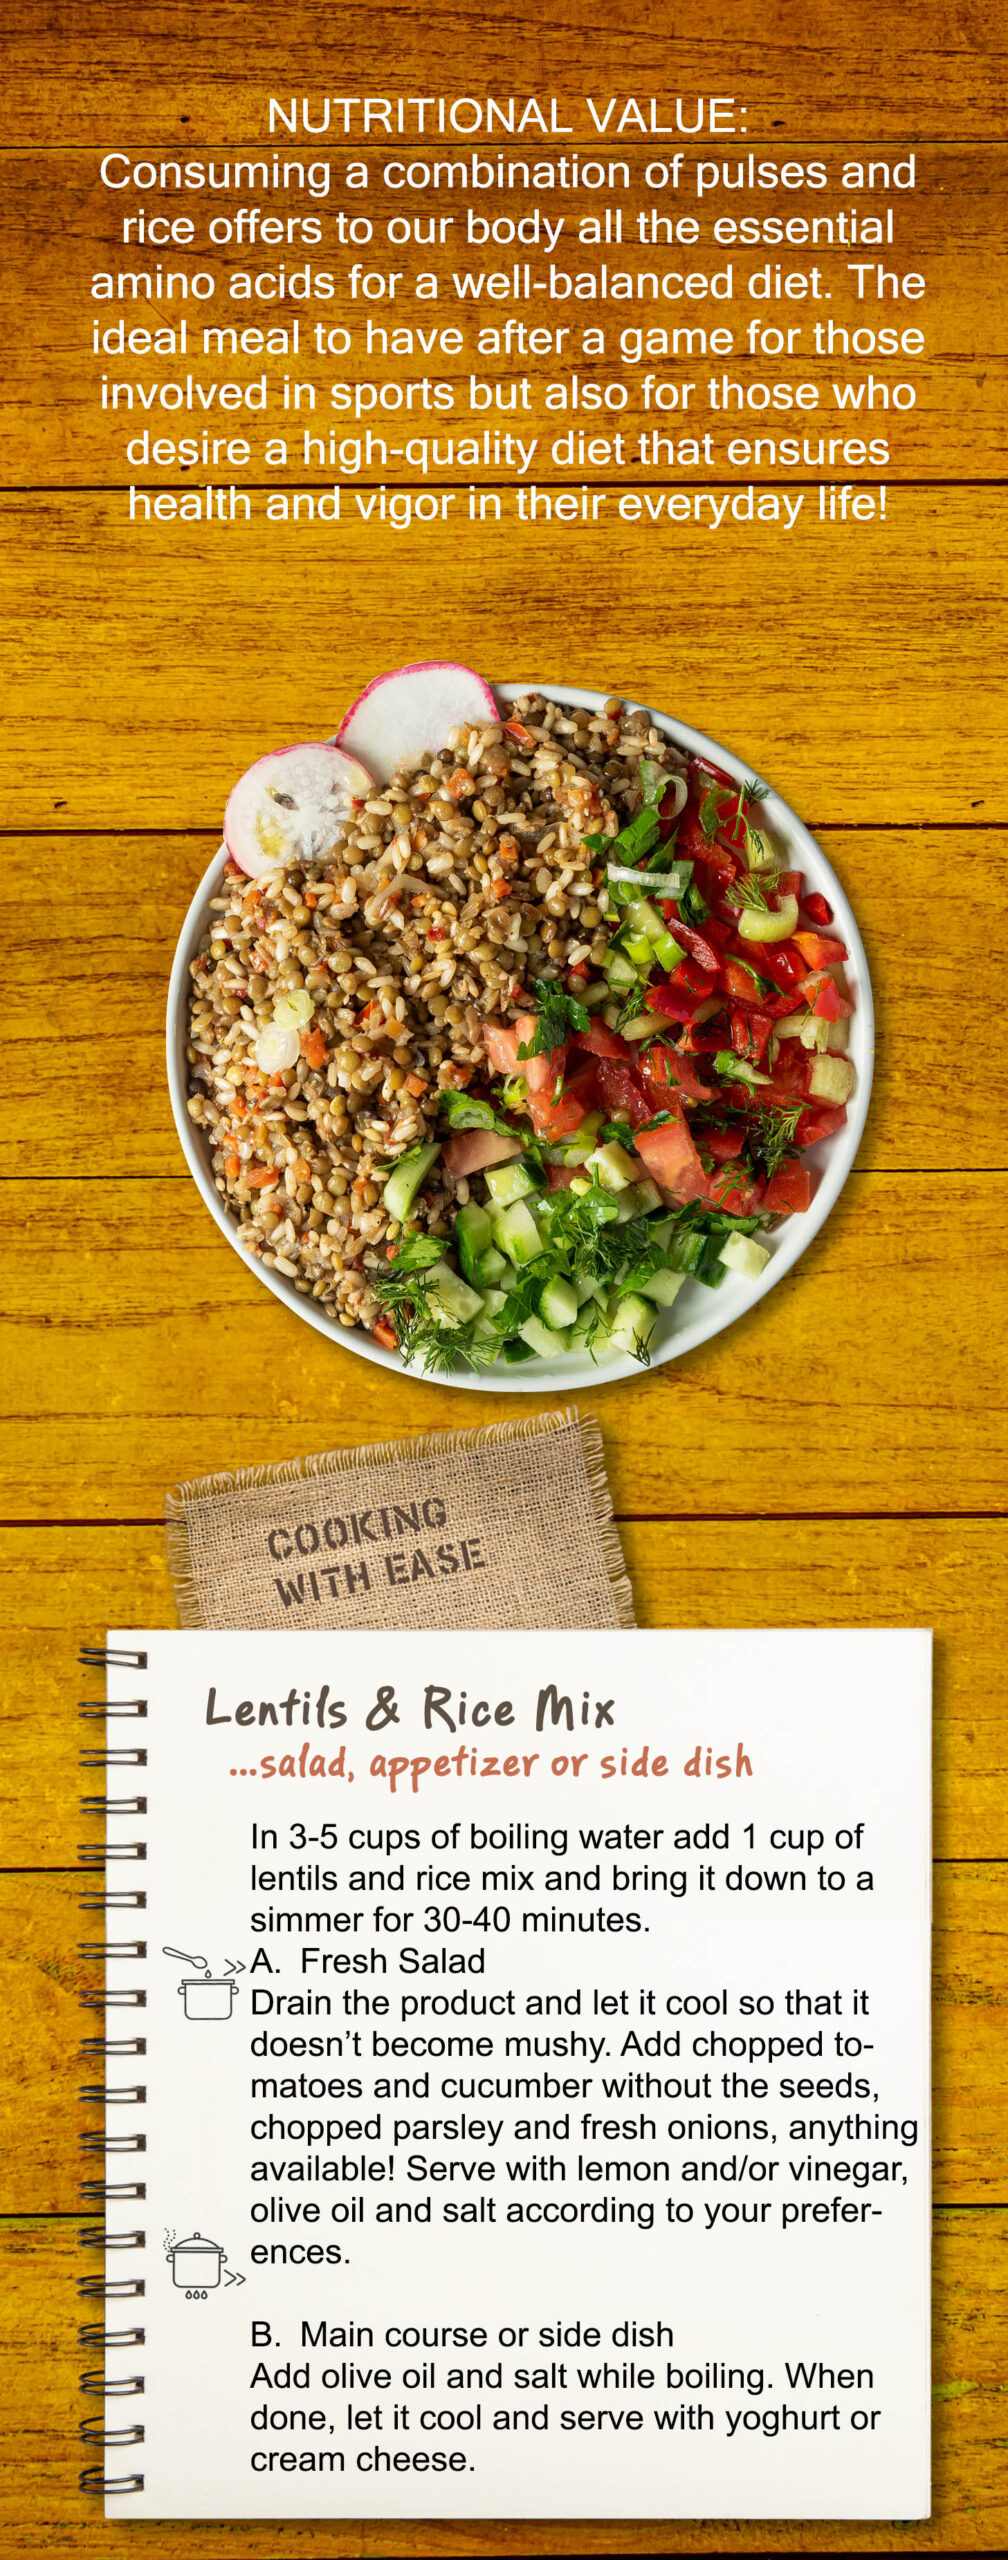 Consuming a combination of pulses and rice offers to our body all the essential amino acids for a well-balanced diet. The ideal meal to have after a game for those involved in sports but also for those who desire a high-quality diet that ensures health and vigor in their everyday life! Easy to Cook In 3-5 cups of boiling water add 1 cup of lentils and rice mix and bring it down to a simmer for 30-40 minutes. A. Fresh Salad Drain the product and let it cool so that it doesn’t become mushy. Add chopped tomatoes and cucumber without the seeds, chopped parsley and fresh onions, anything available! Serve with lemon and/or vinegar, olive oil and salt according to your preferences. B. Main course or side dish Add olive oil and salt while boiling. When done, let it cool and serve with yoghurt or cream cheese.